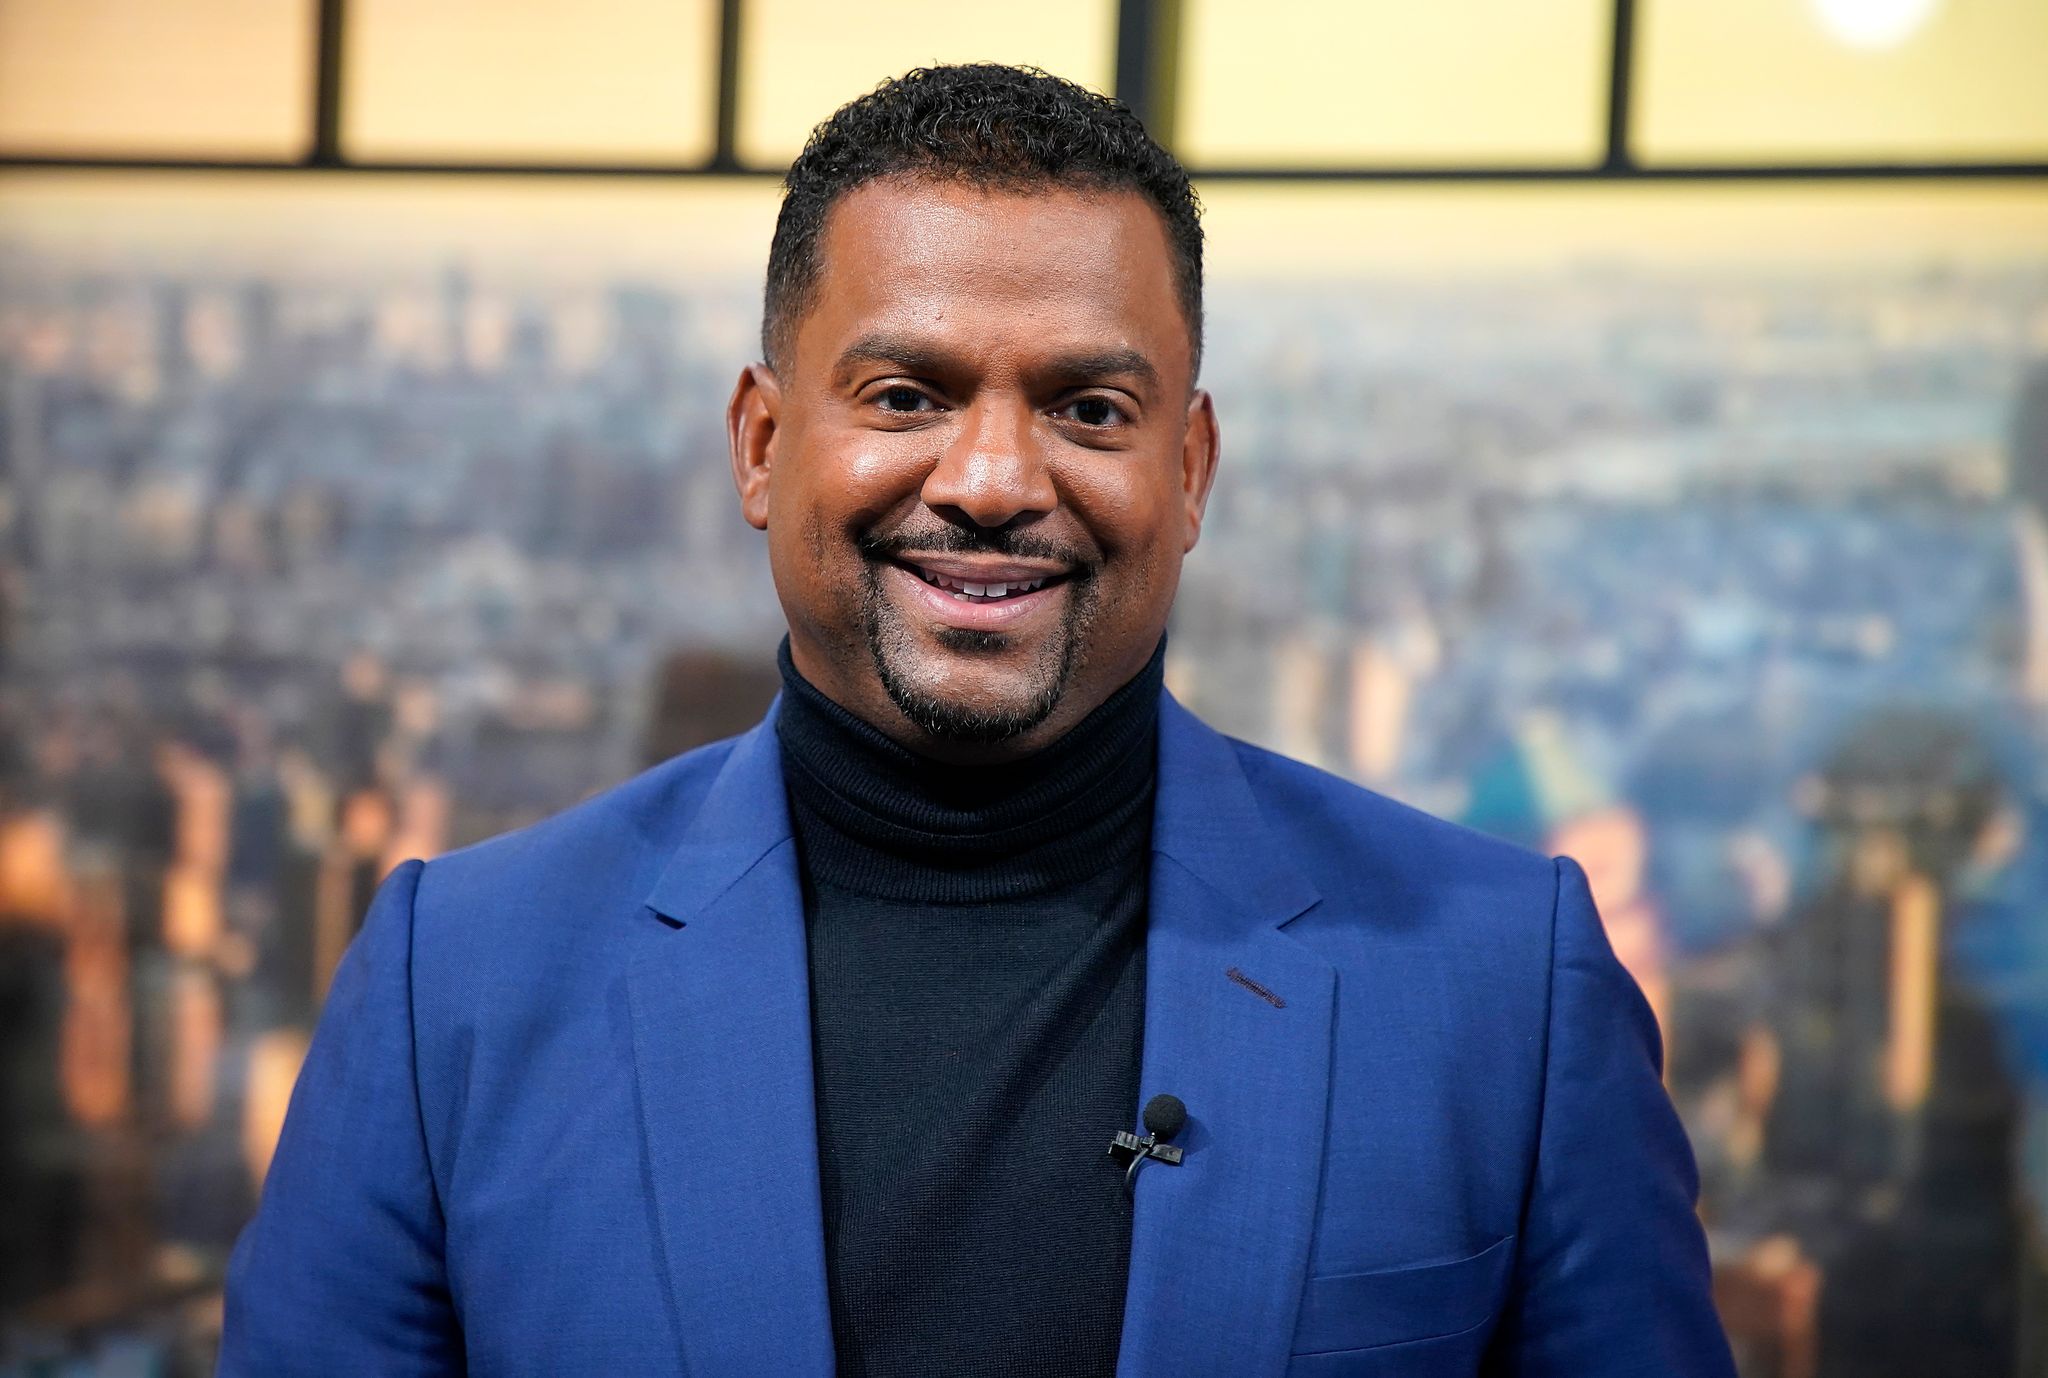 Actor Alfonso Ribeiro at People Now Studios on November 14, 2019 in New York City. | Photo: Getty Images